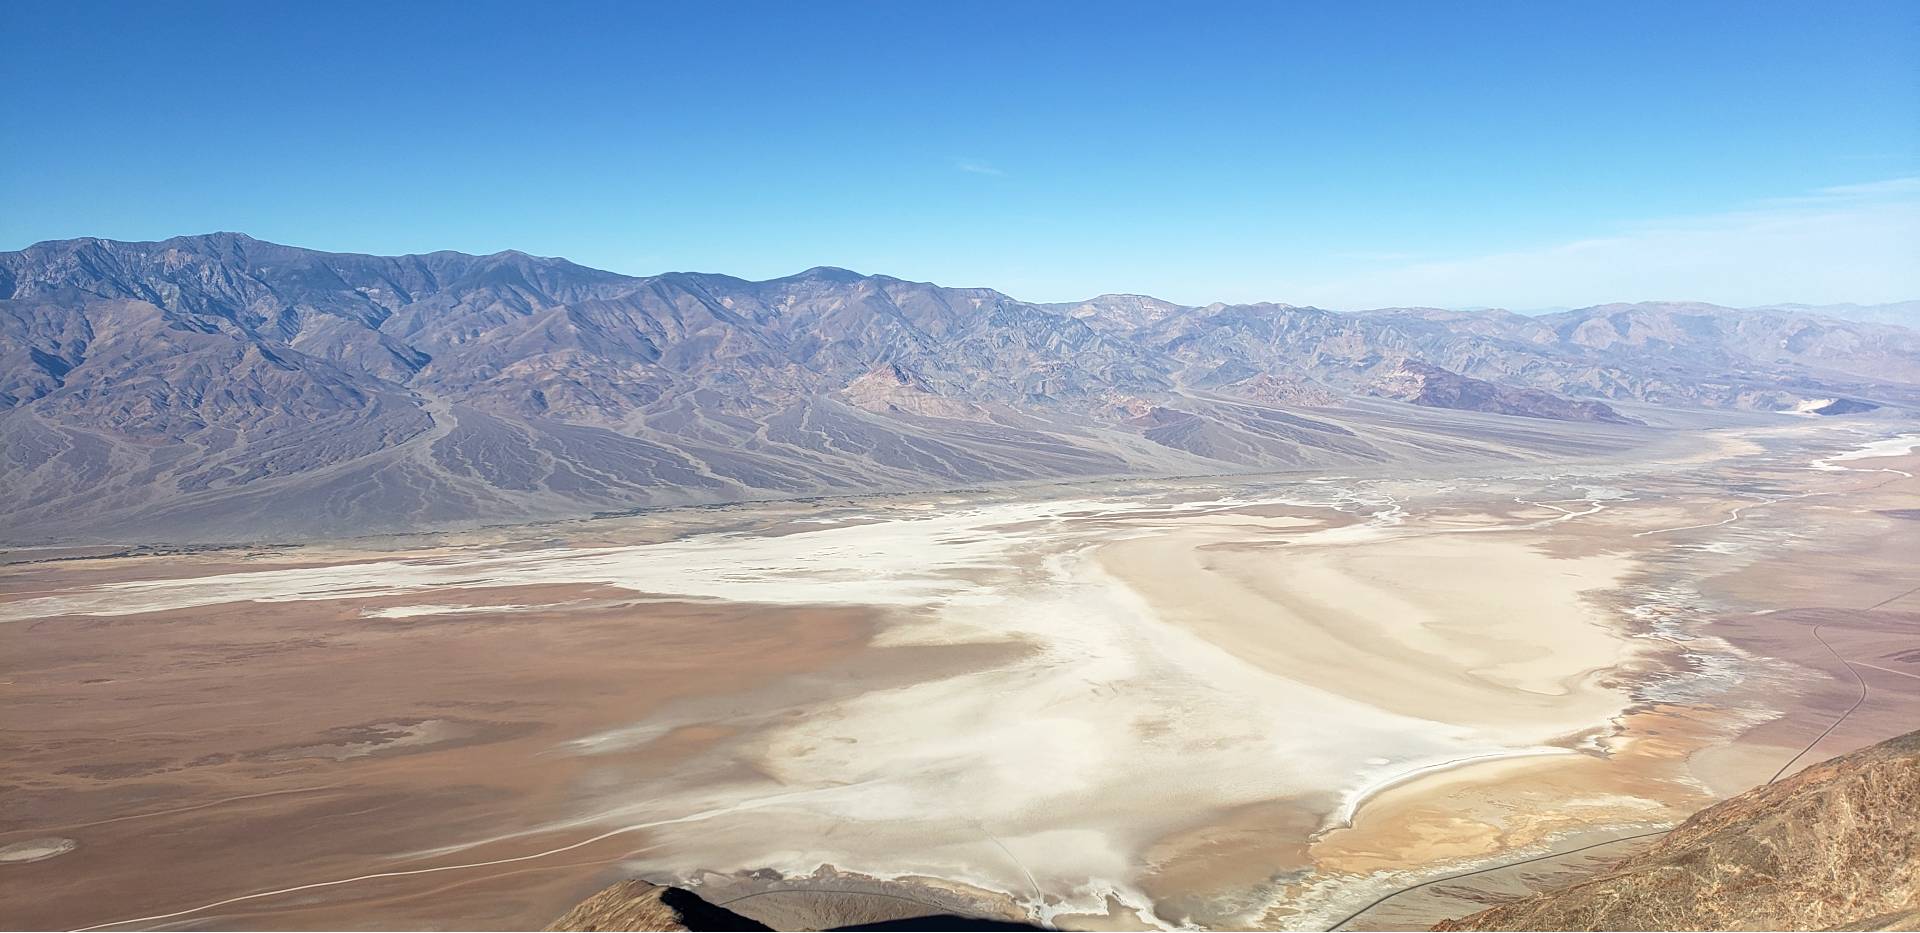 Dantes View - Death Valley Badwater basin and Telescope peak